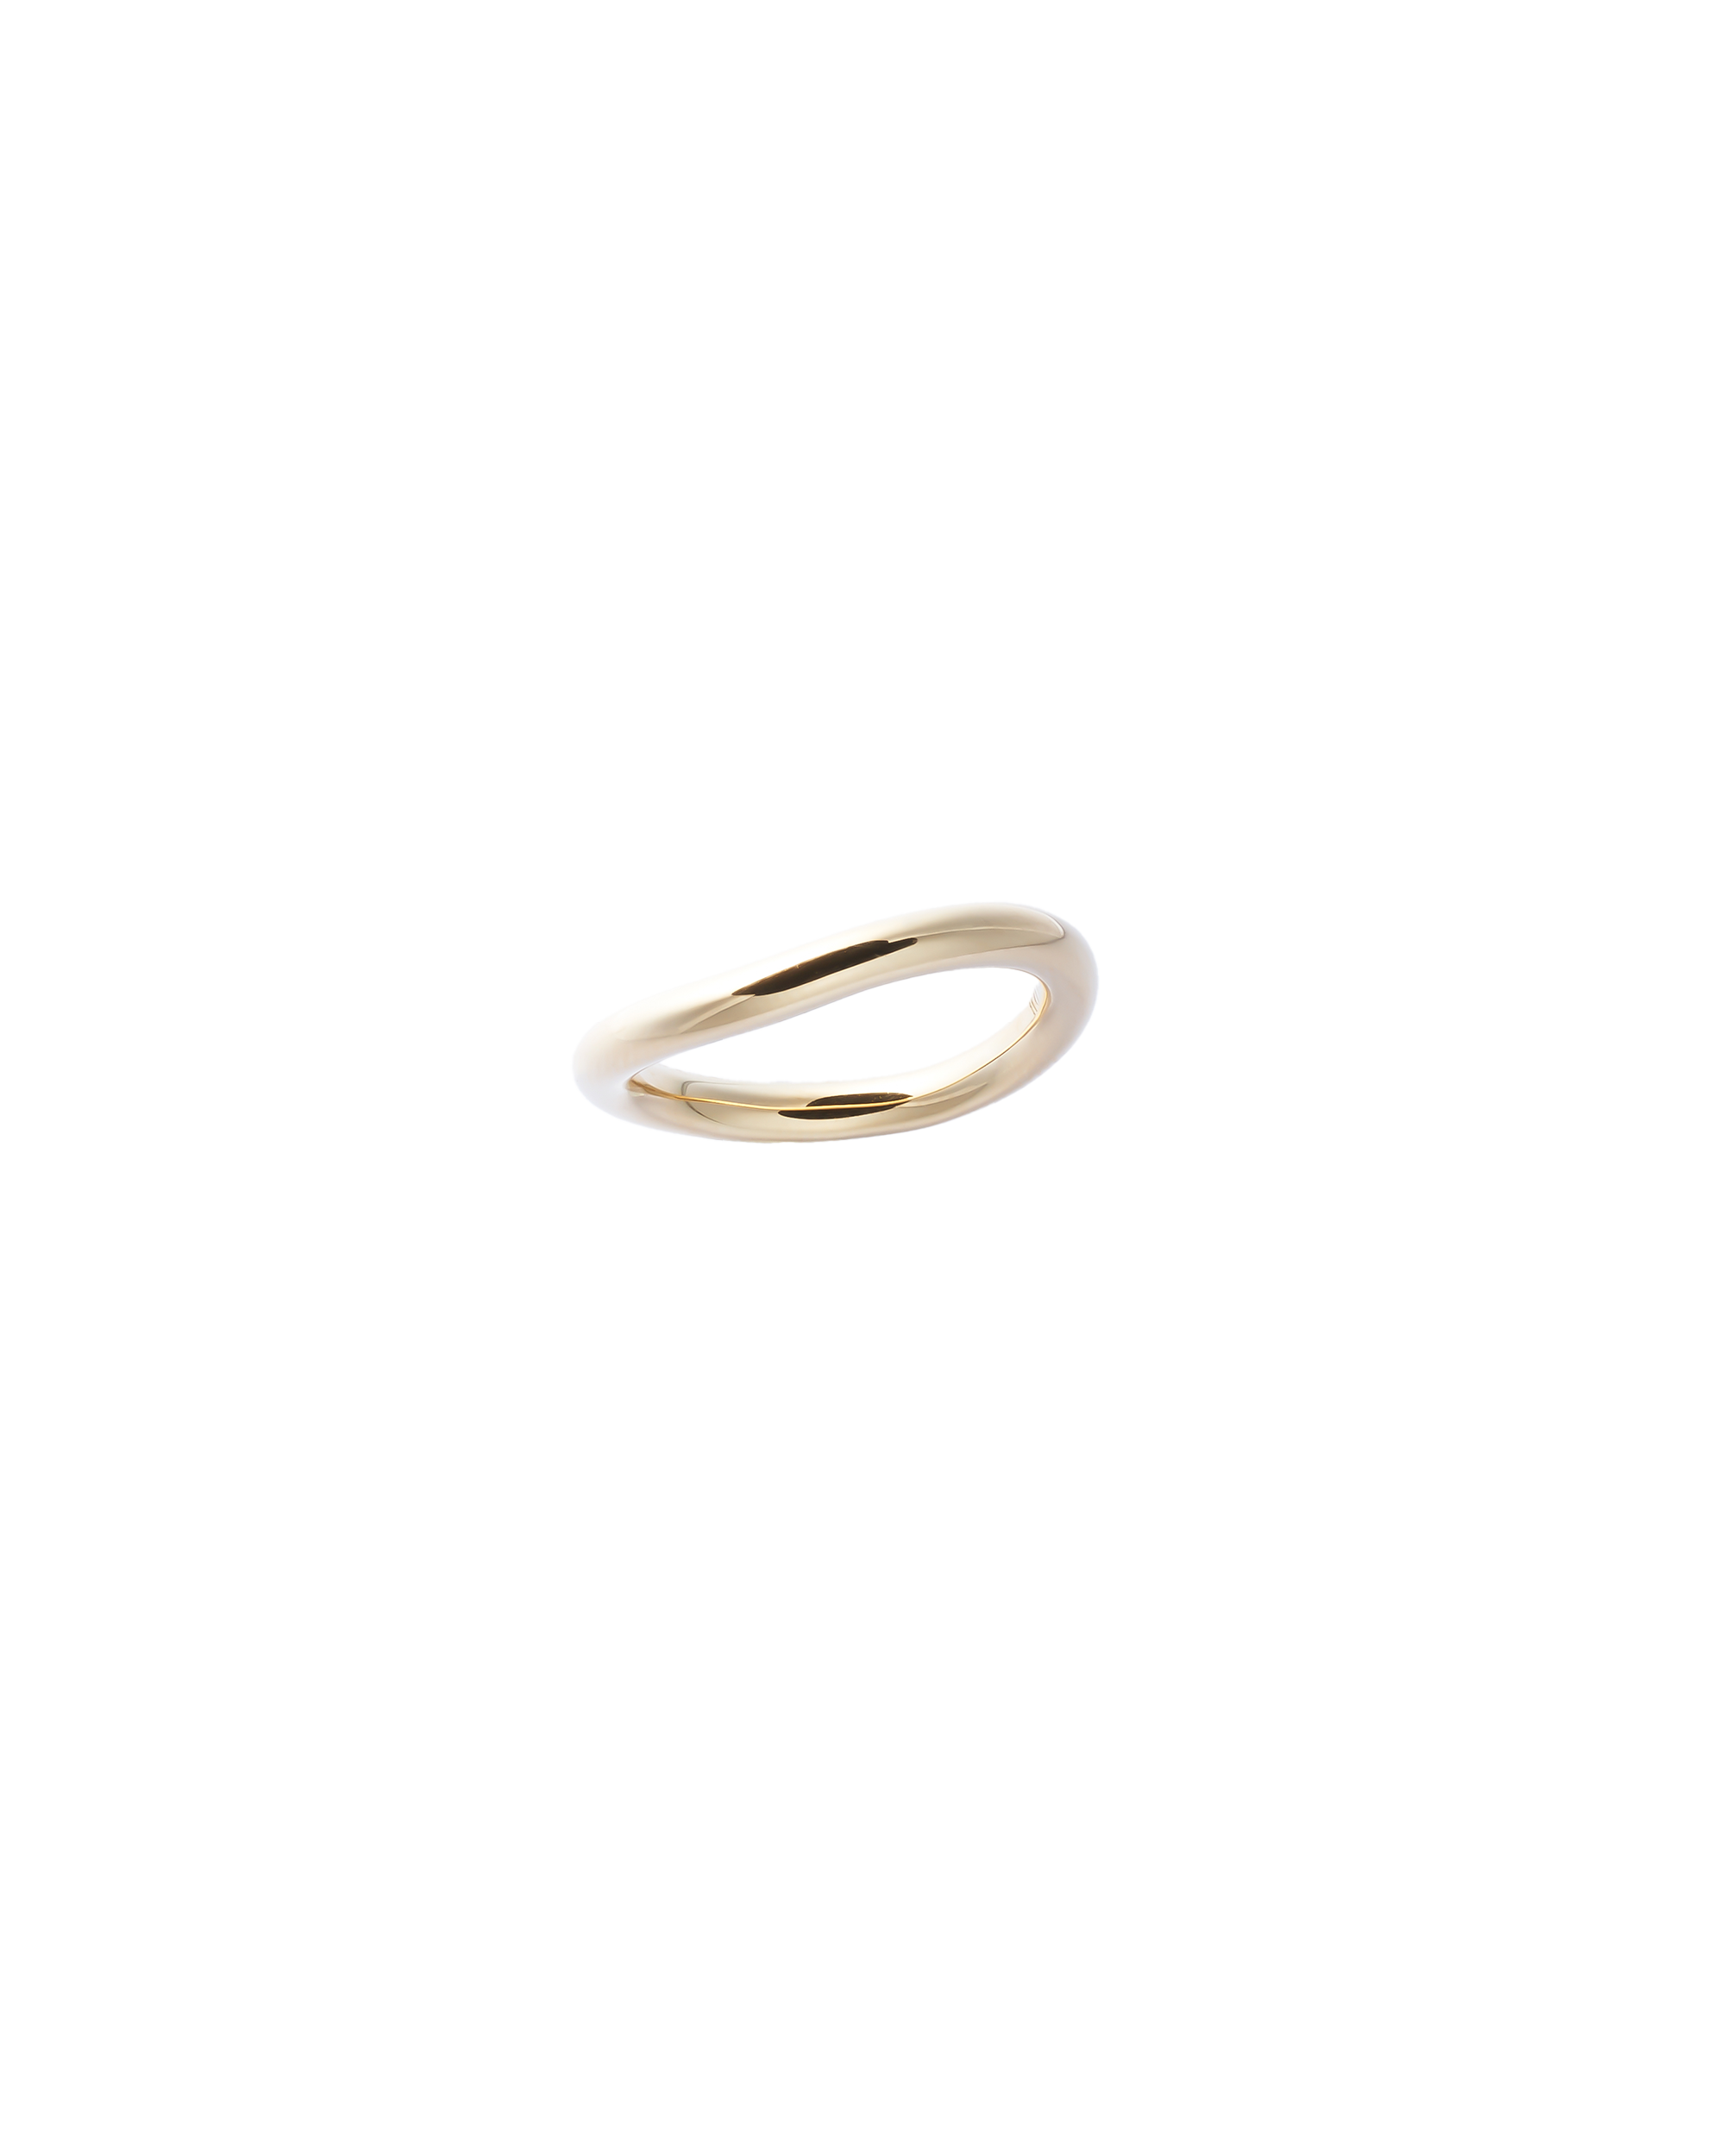 Fortune Wavy Ring L -K18-